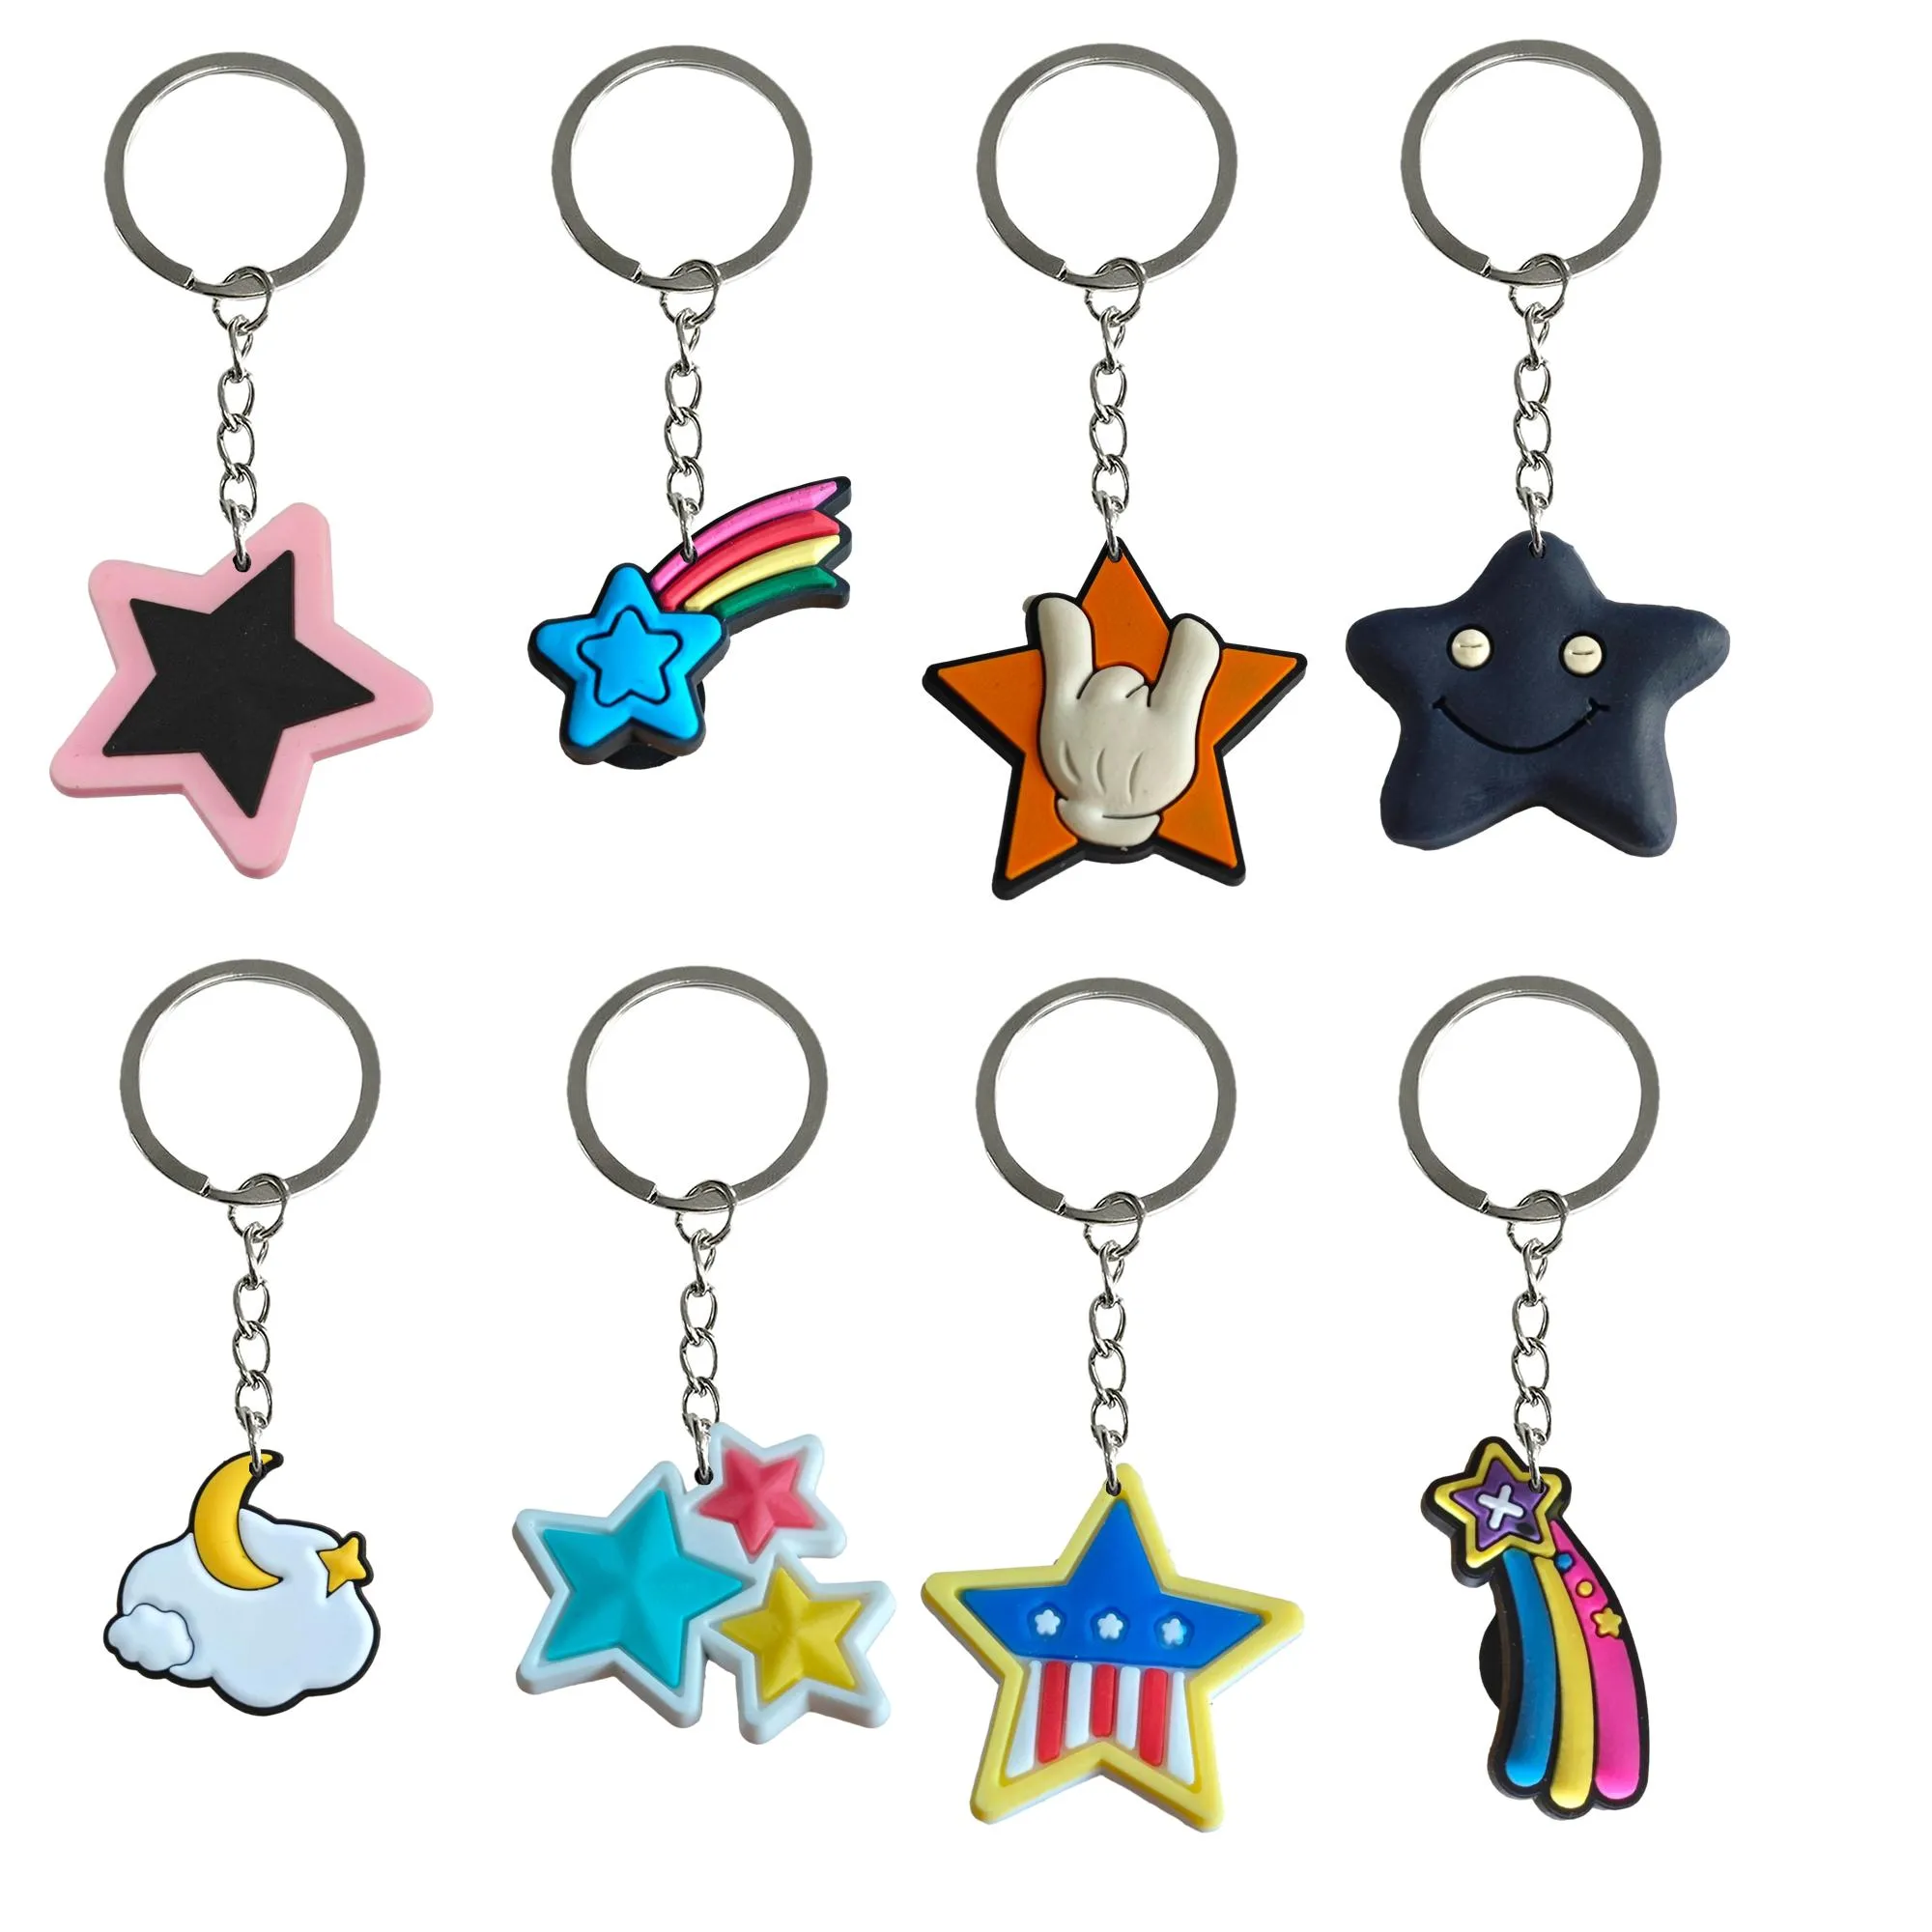 Key Rings Star Keychain for Goodie Bag Stuffers Supplies Keychains Party Favors Sackepacks Sac à dos SCOLOG SCOLOG STOCH STOCKS CHRI OTY2O